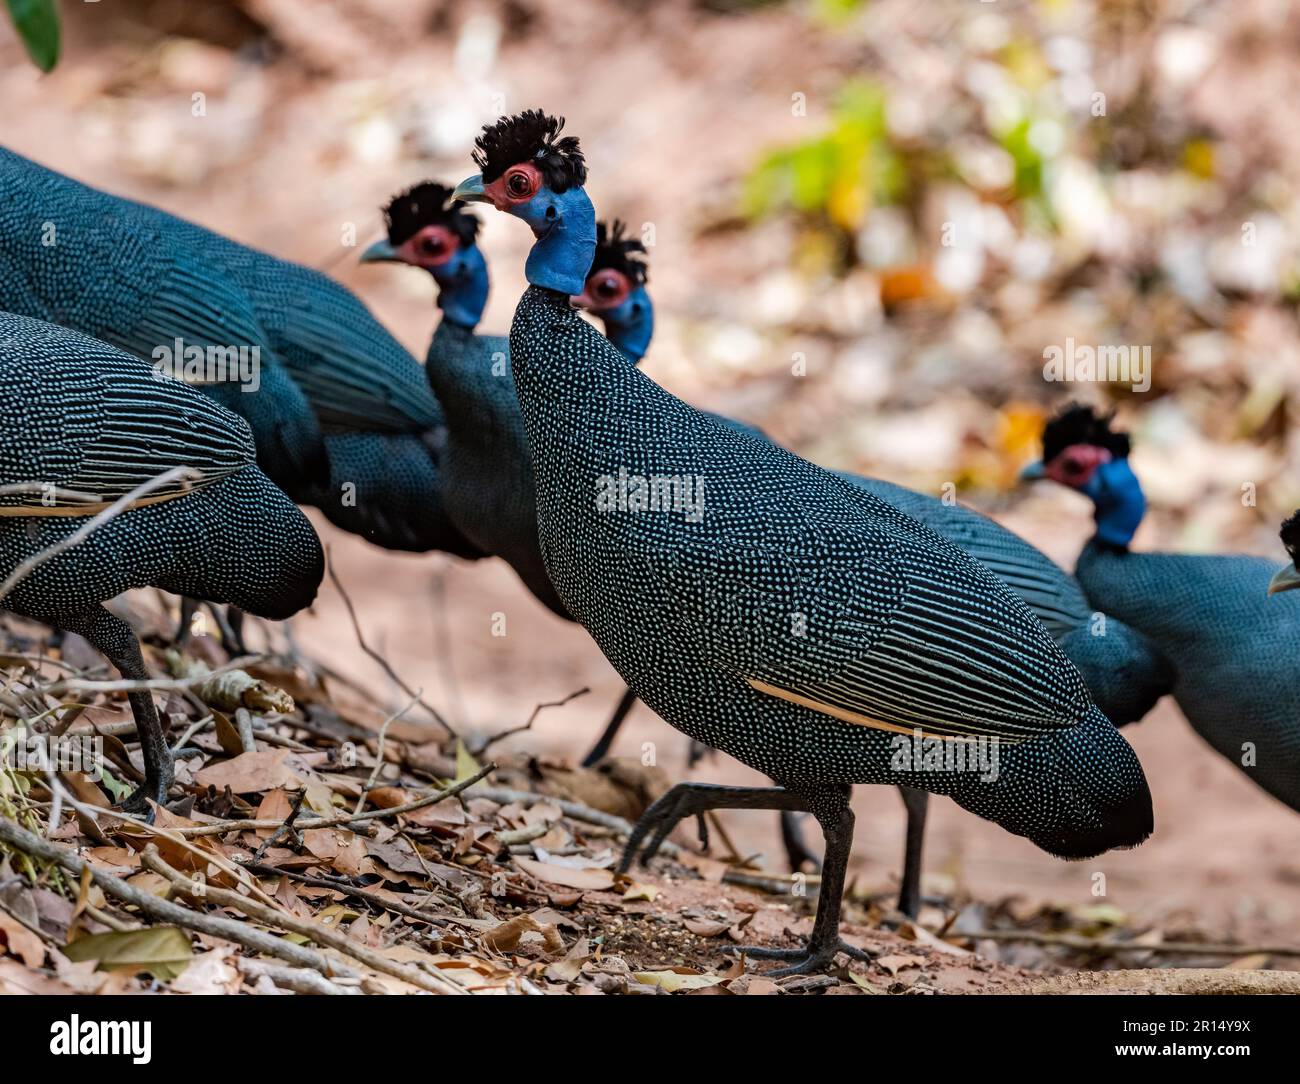 A group Eastern Crested Guineafowls (Guttera pucherani) foraging in forest. Kenya, Africa. Stock Photo